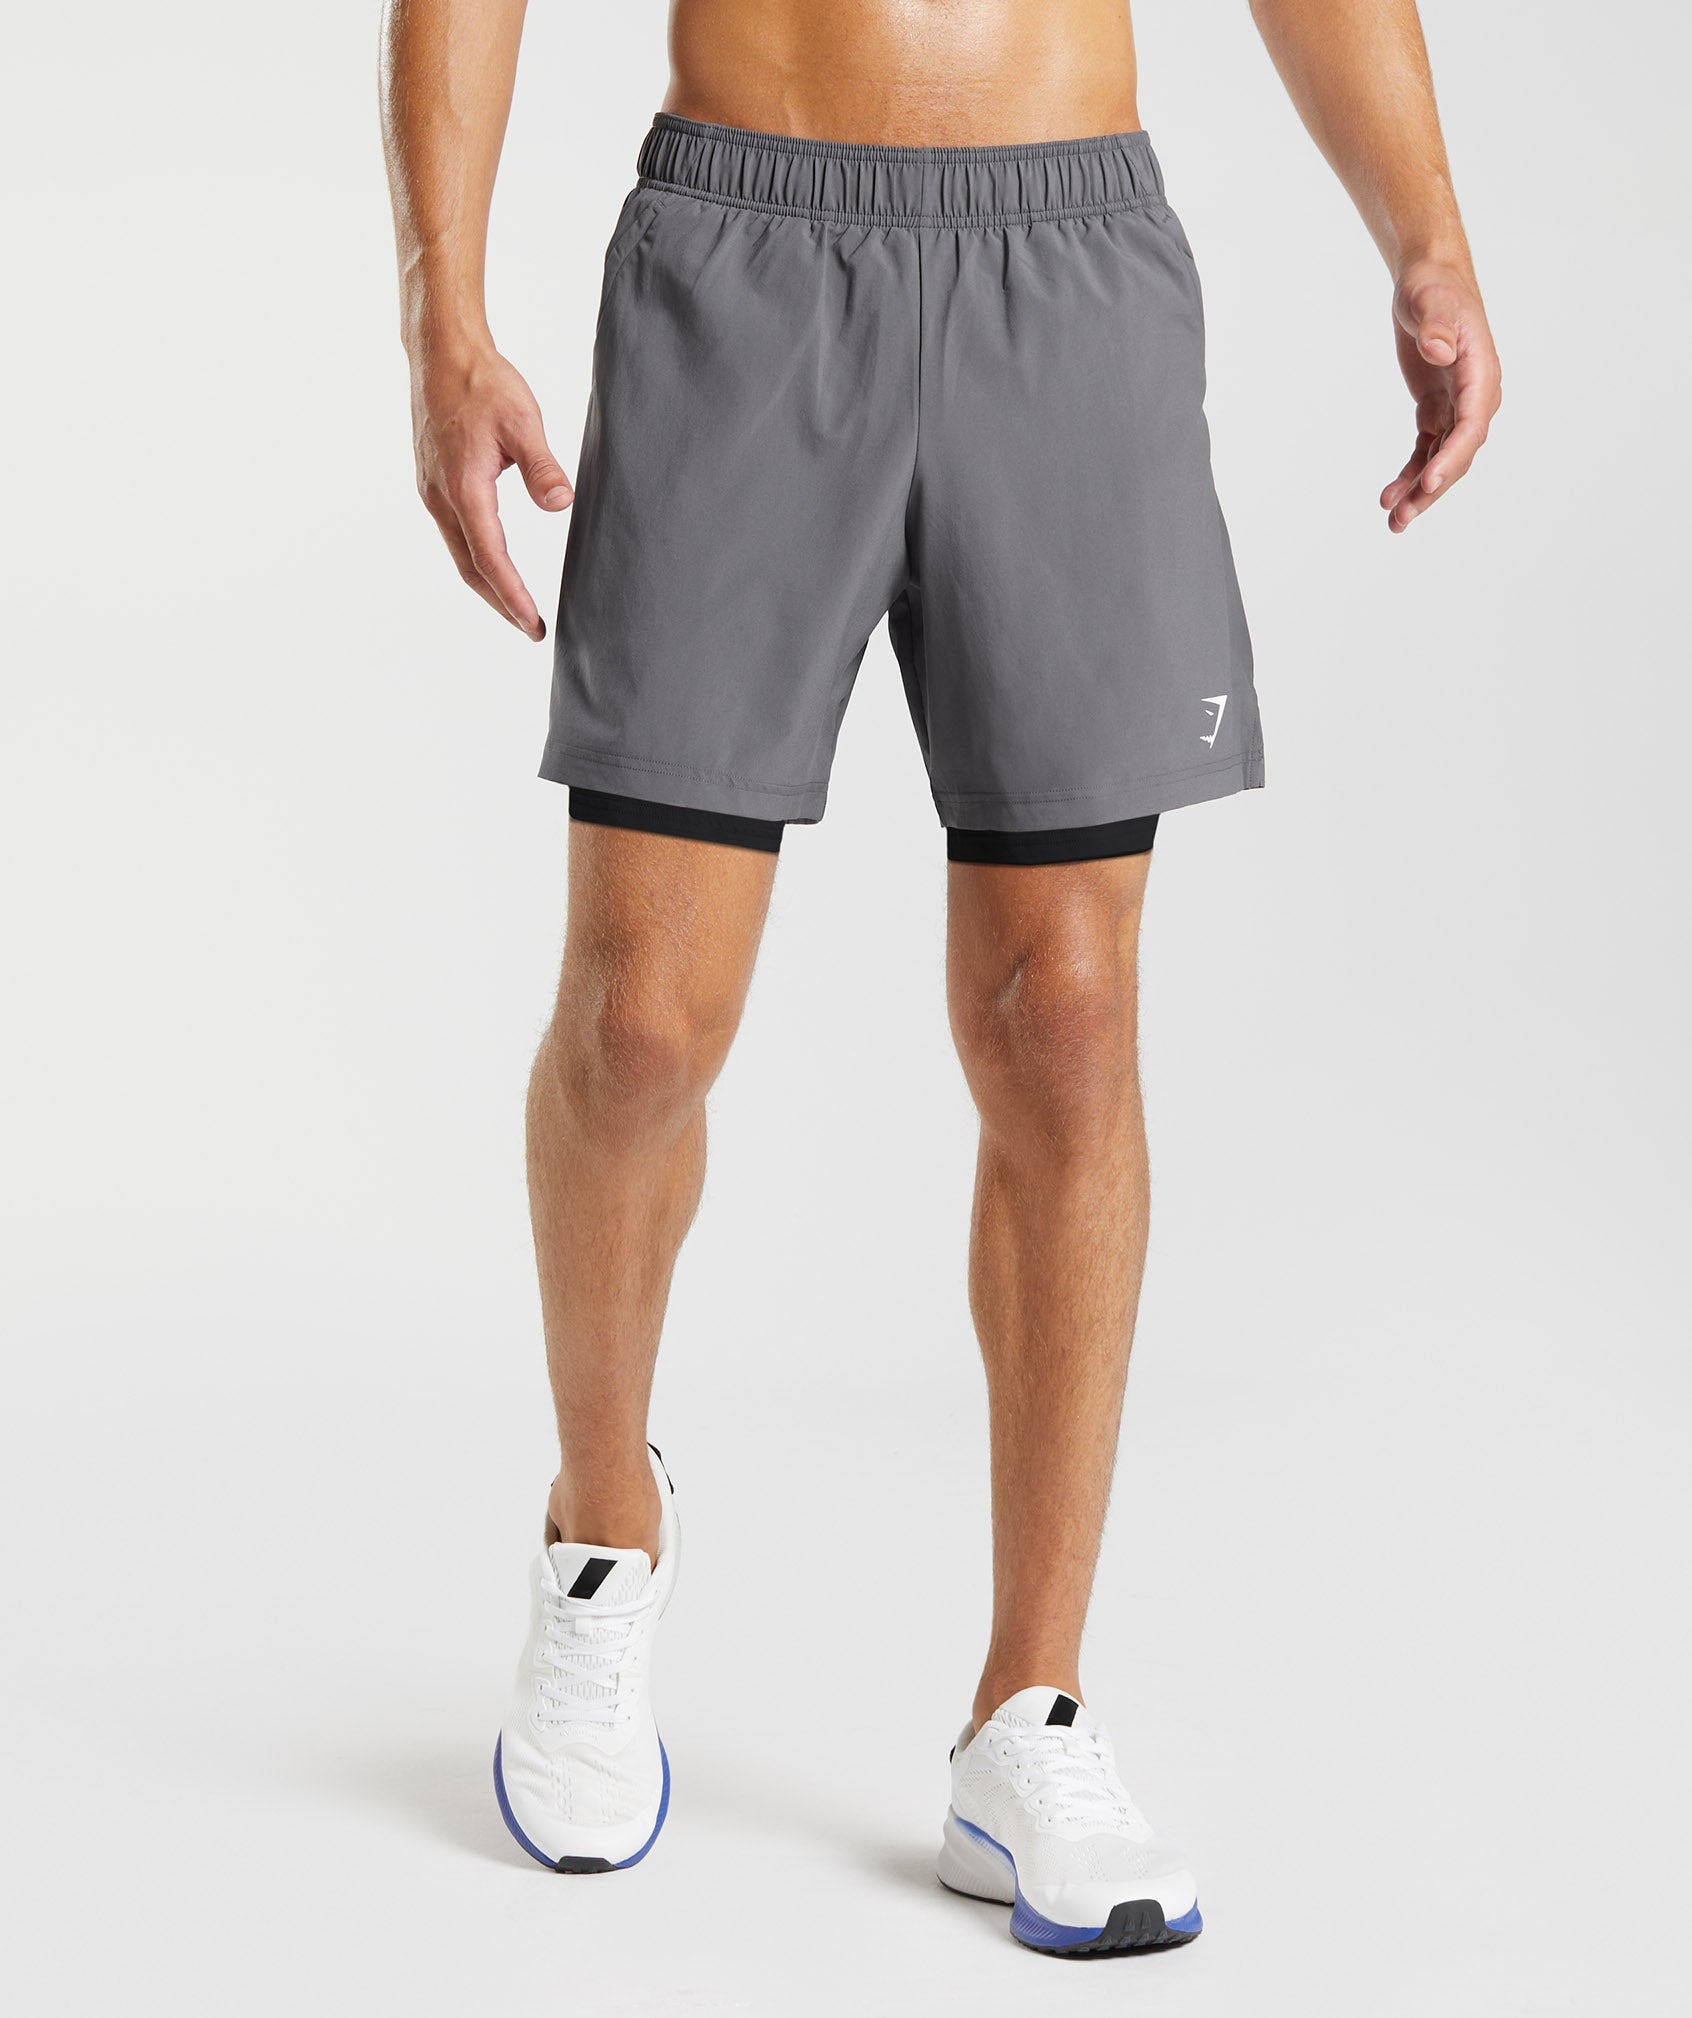 Sport 7" 2 In 1 Shorts in Silhouette Grey/Black - view 1